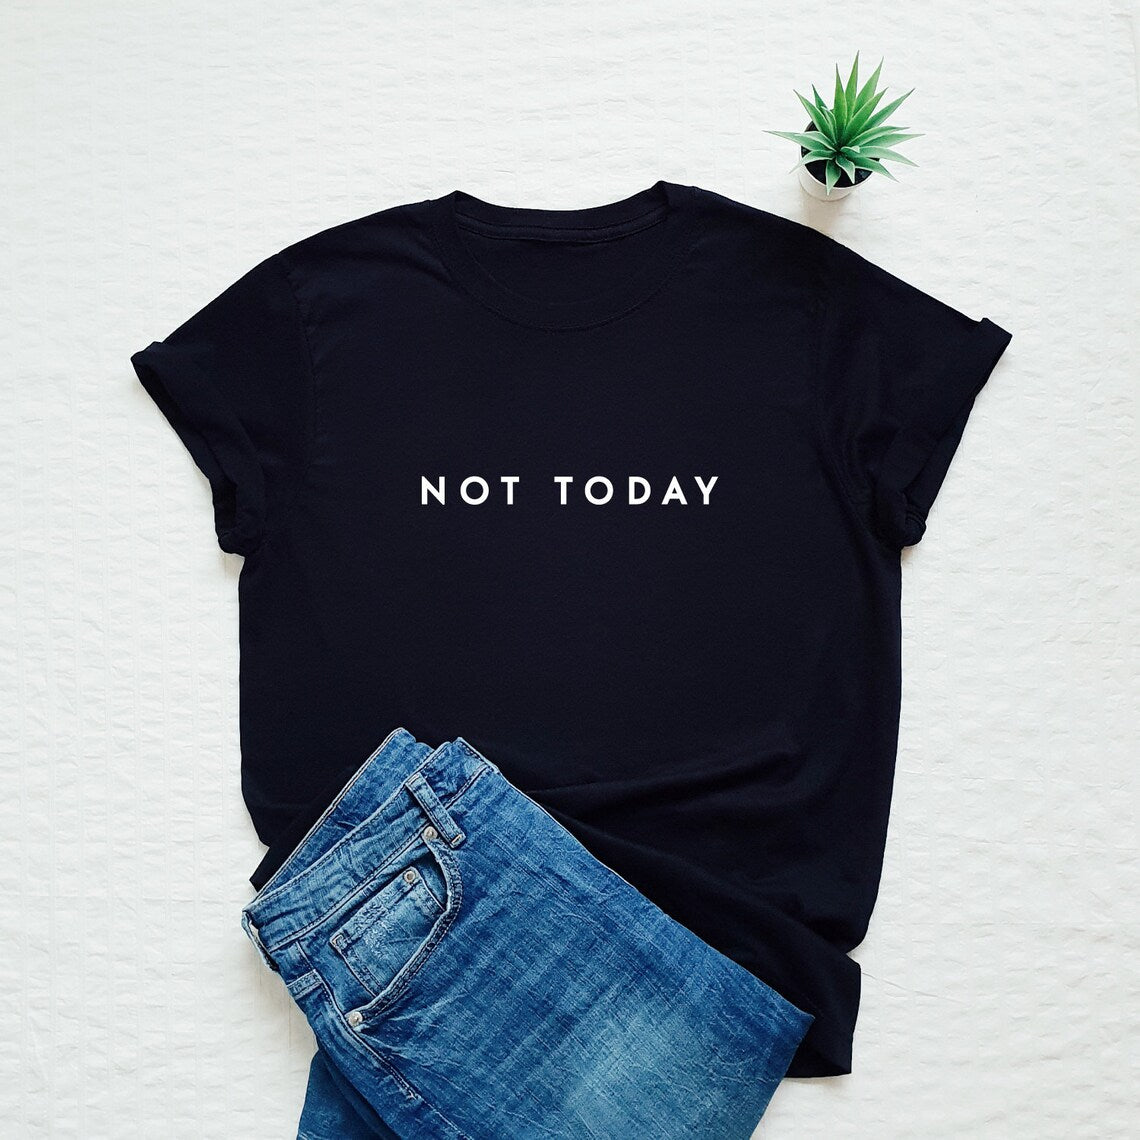 Not Today Printed Unisex T-Shirt